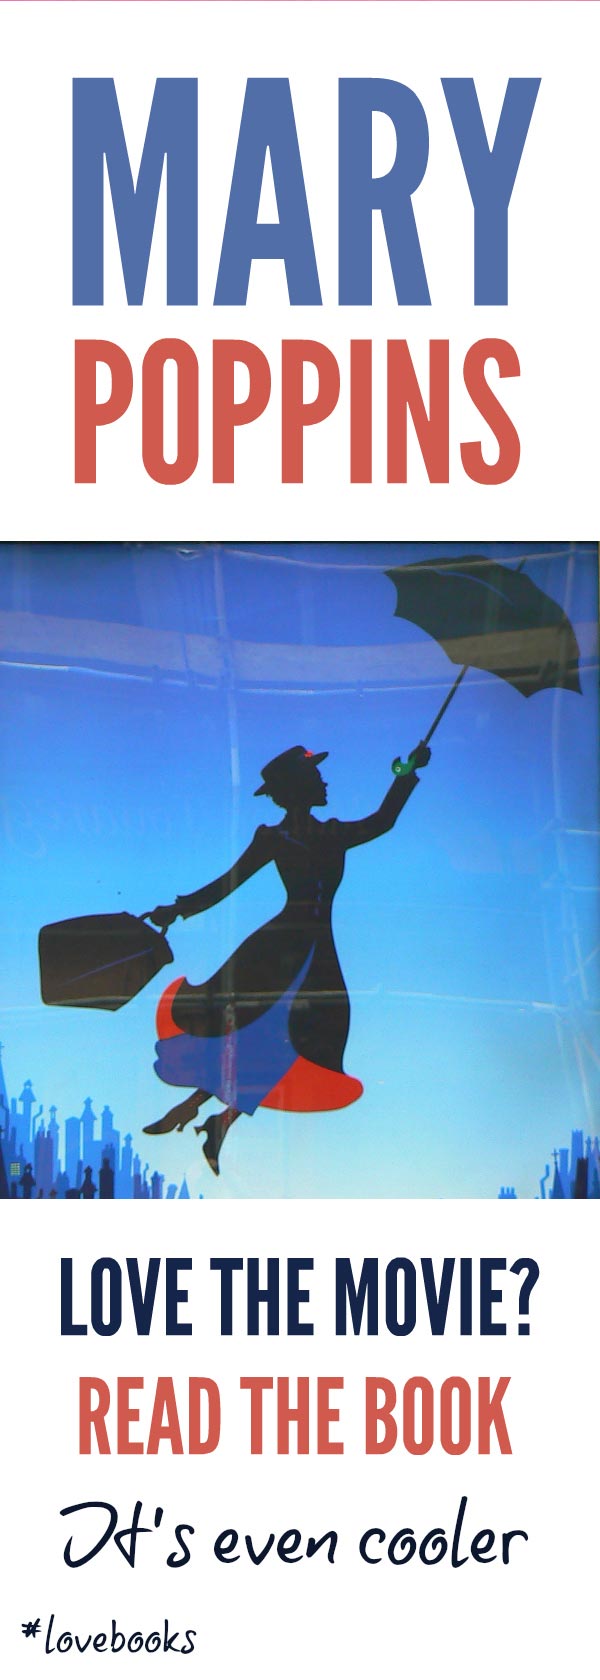 Mary Poppins - if you love the movie, read the original book, it is even cooler and quirkier #marypoppins #kidsbooks